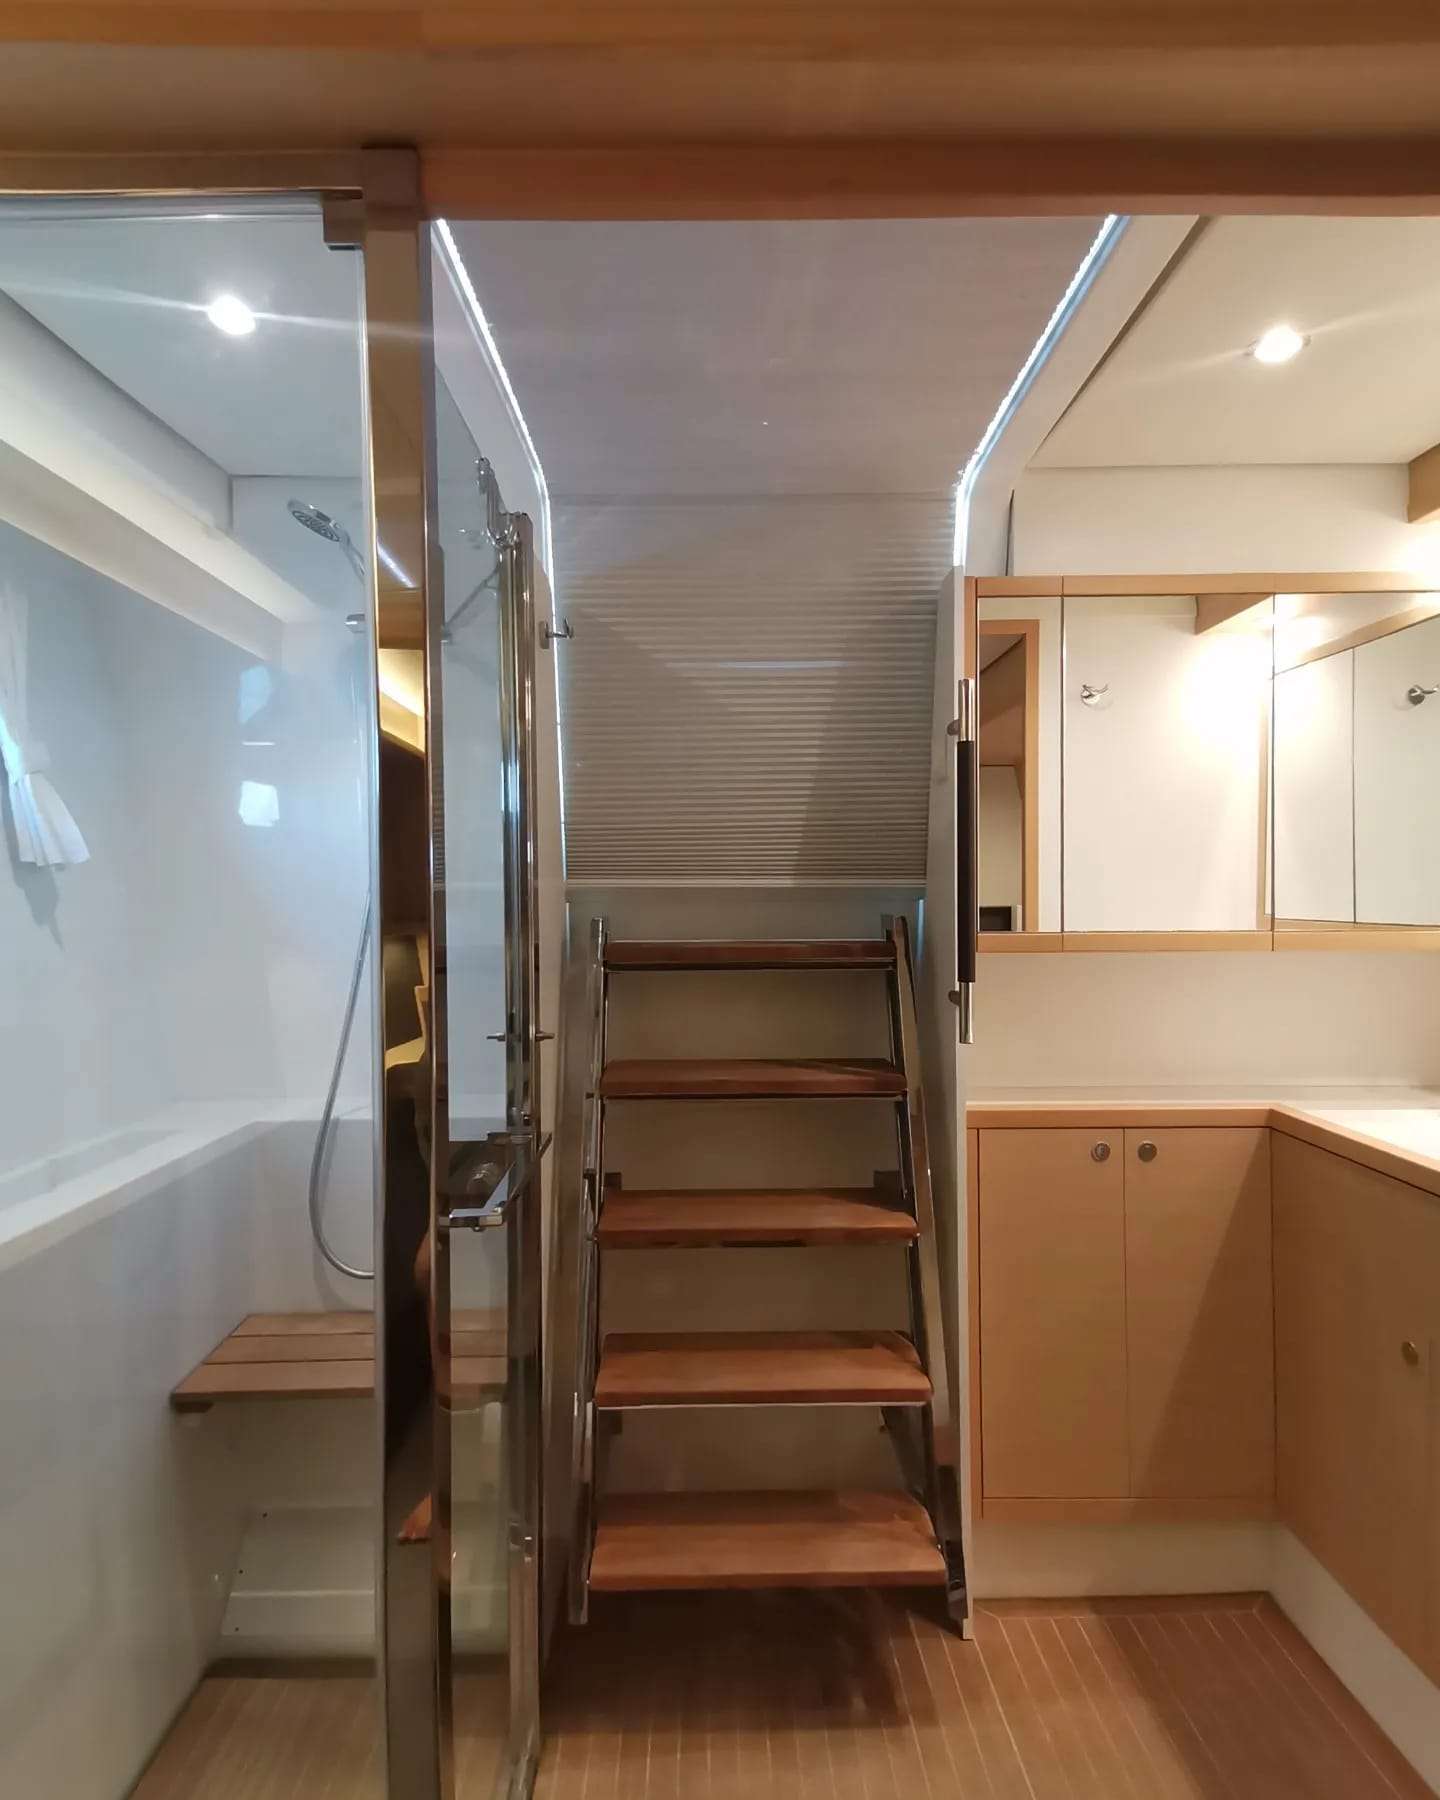 Bathroom and rear access from aft cabin